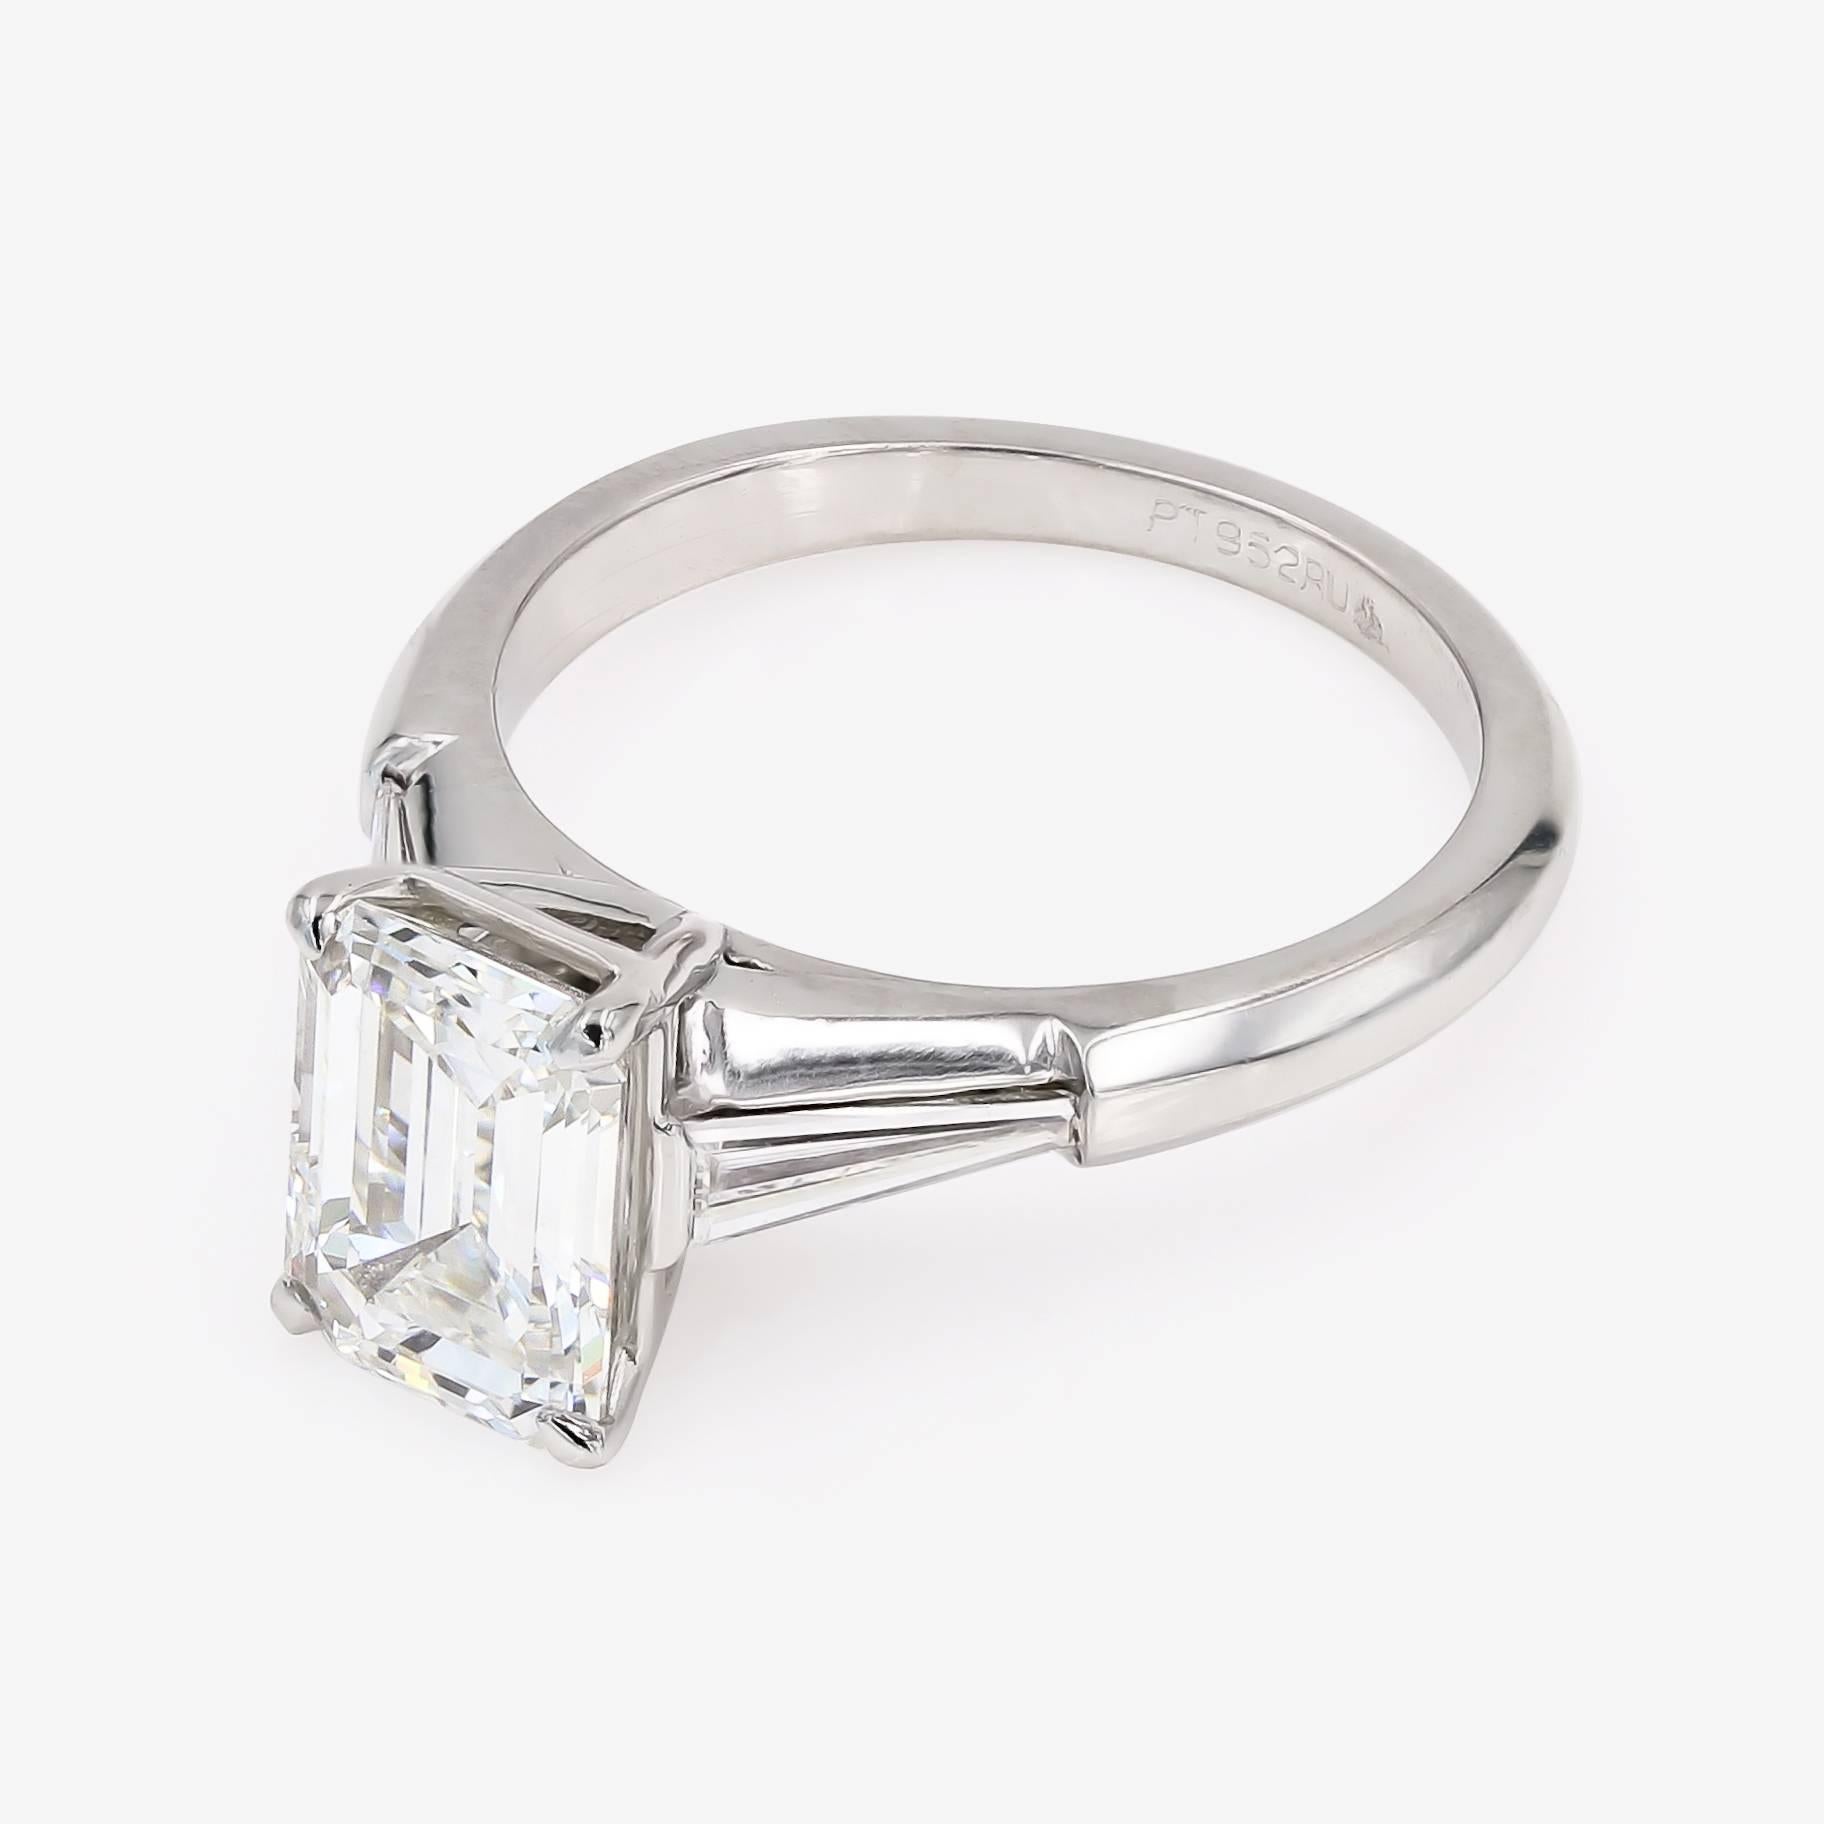 Contemporary GIA Certified 2.29 Carat Emerald Cut and Baguette Diamond Ring in Platinum